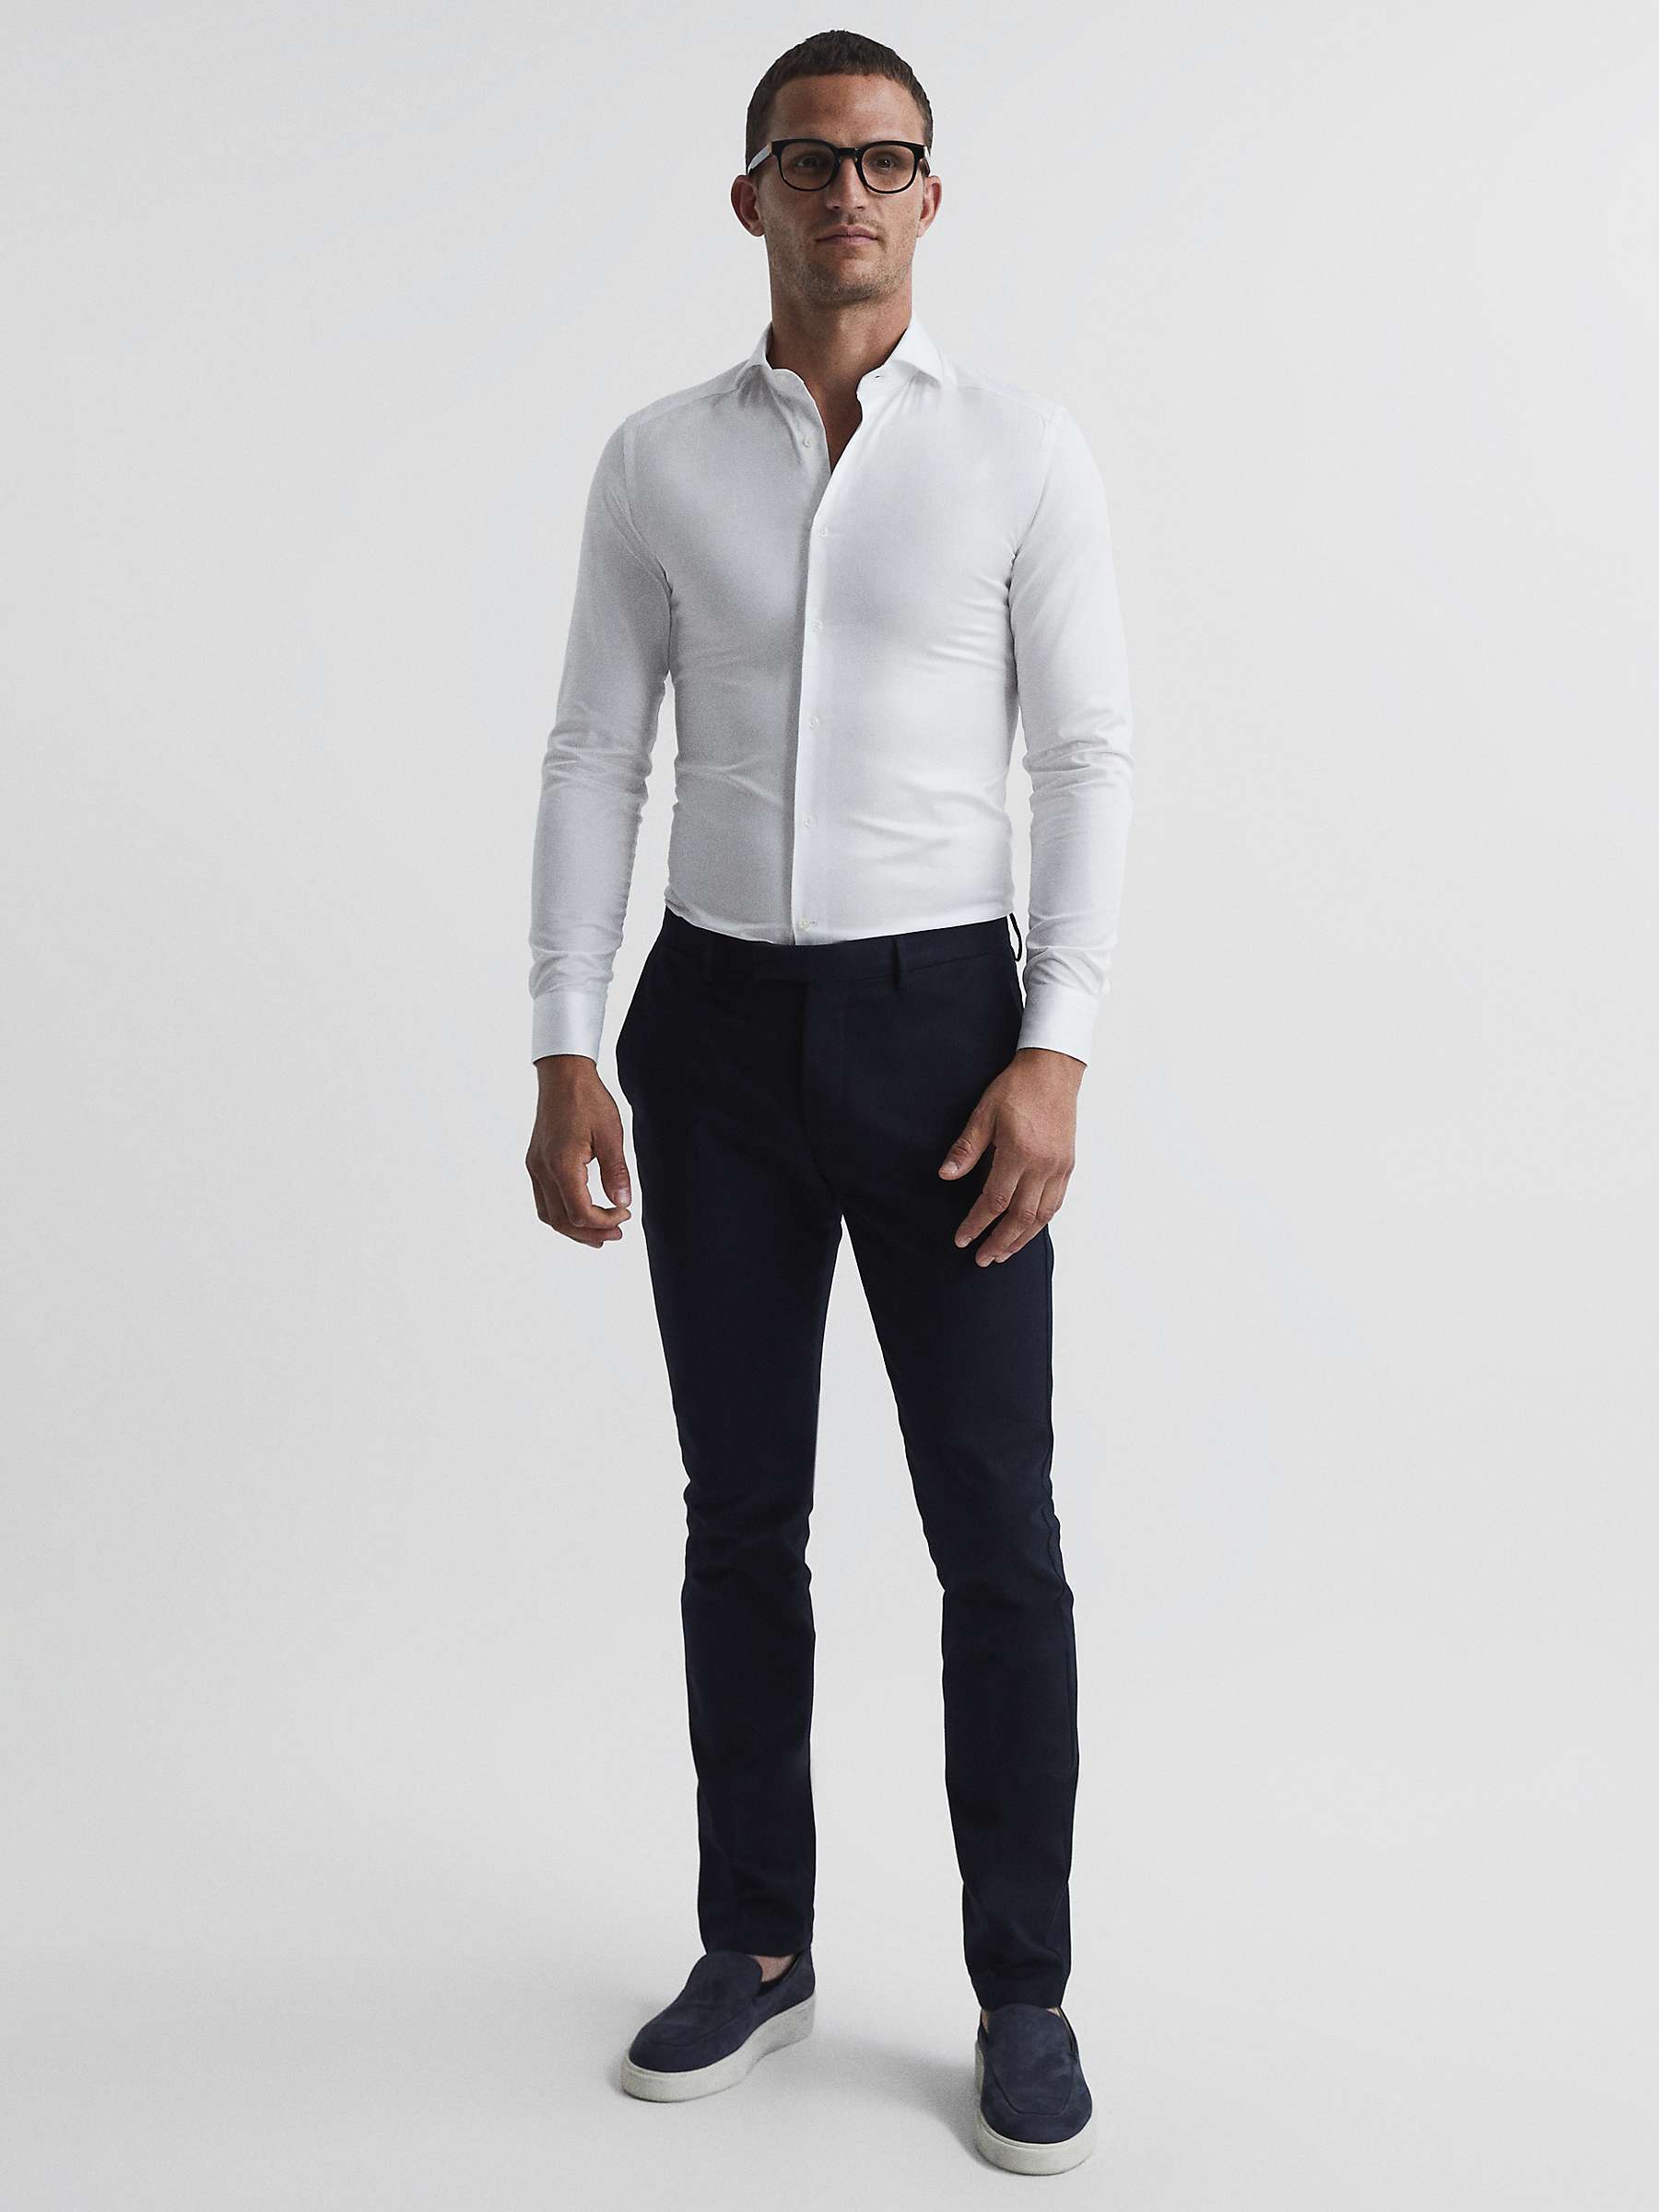 Buy Reiss Storm Cotton Twill Slim Fit Long Sleeve Shirt Online at johnlewis.com